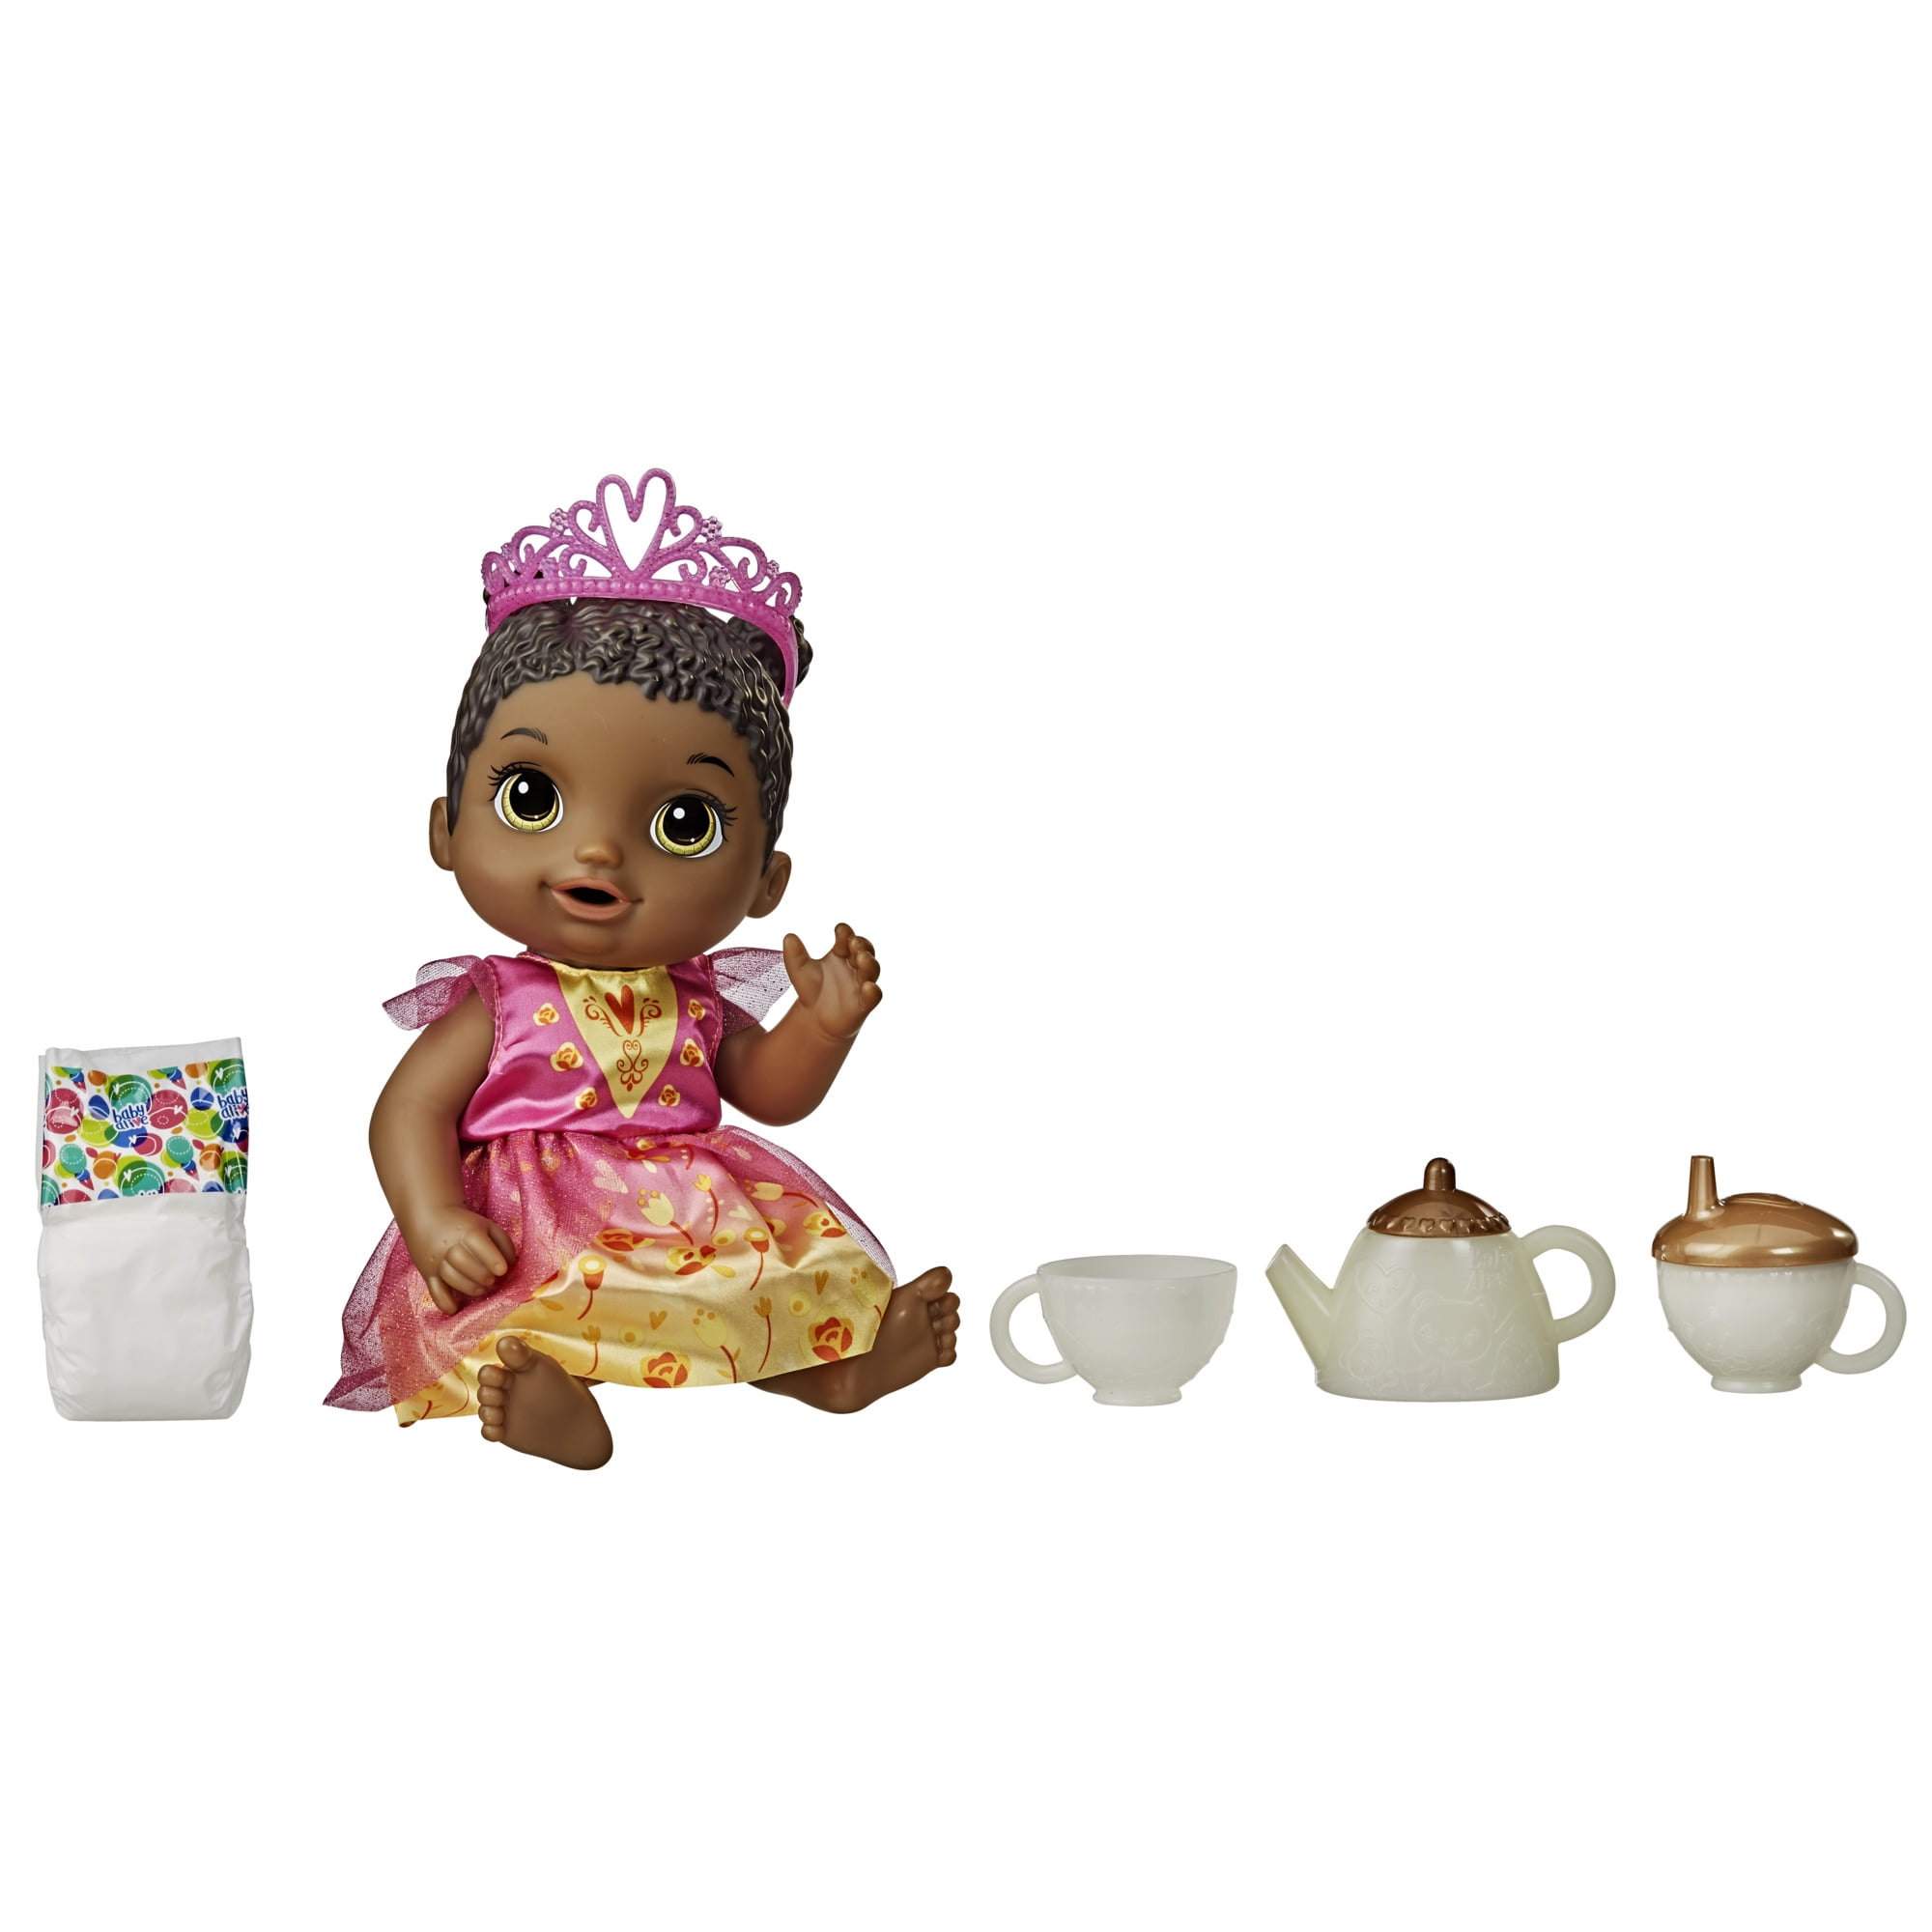 Baby Alive Tea ‘n Sparkles Baby Doll with Black Hair, Includes Color-Changing Tea Set